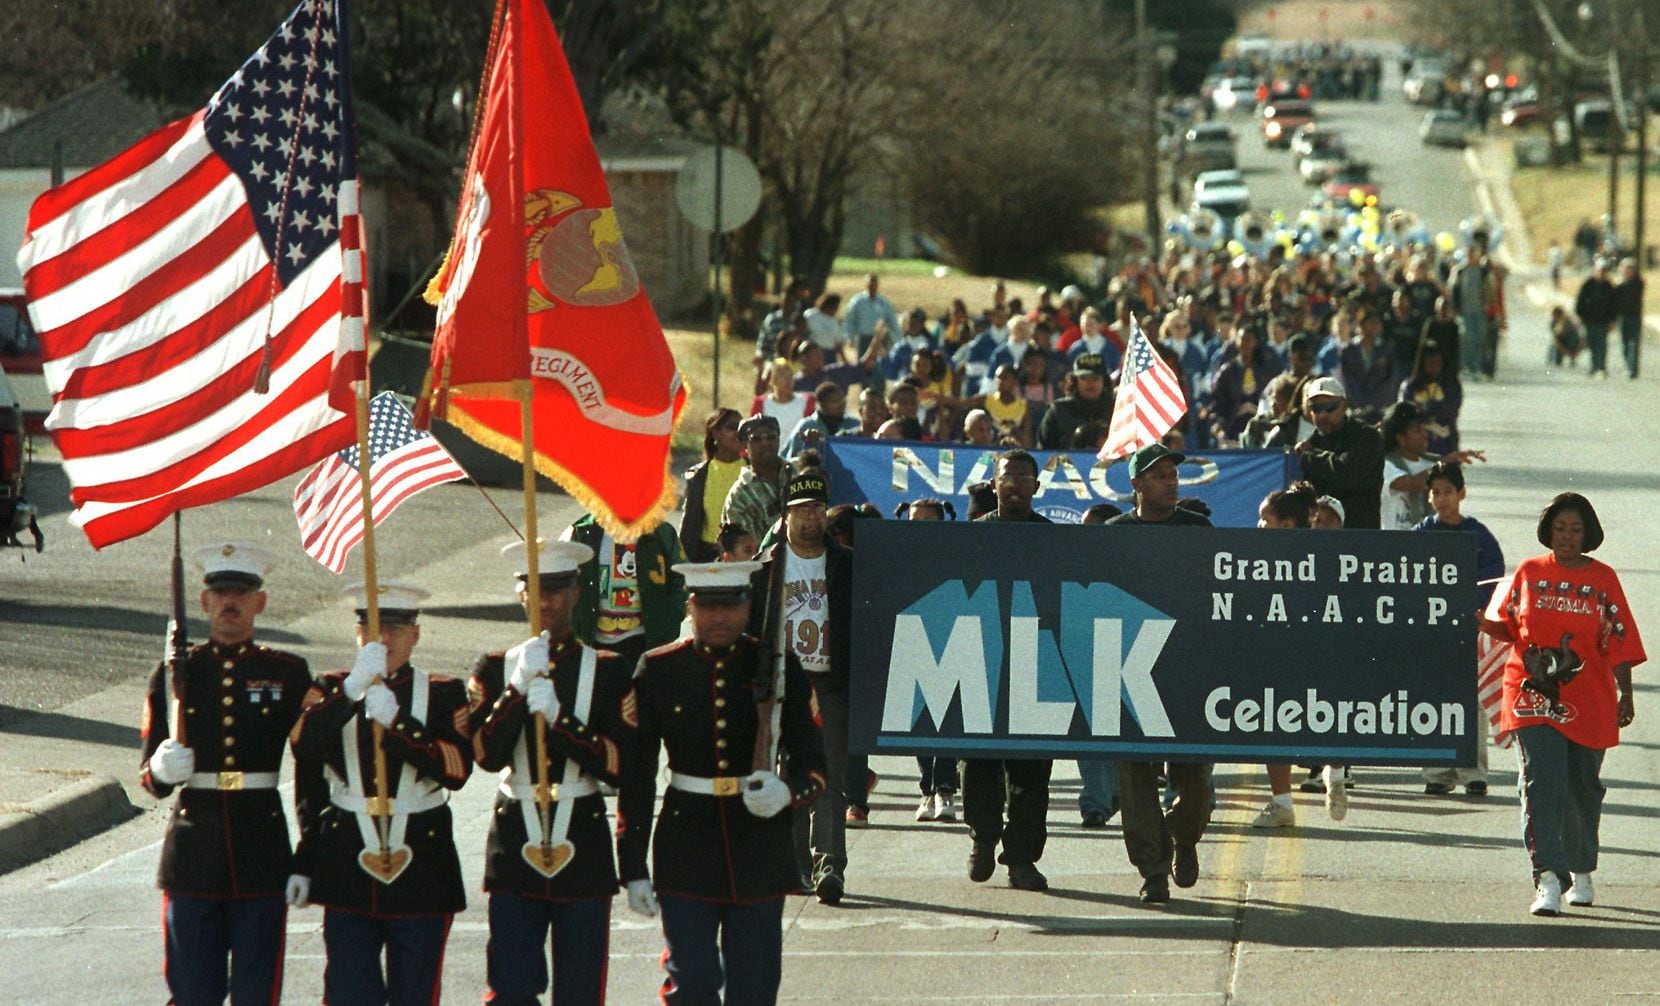 Grand Prairie citizens march in an earlier Dr. Martin Luther King Jr. Day Parade.